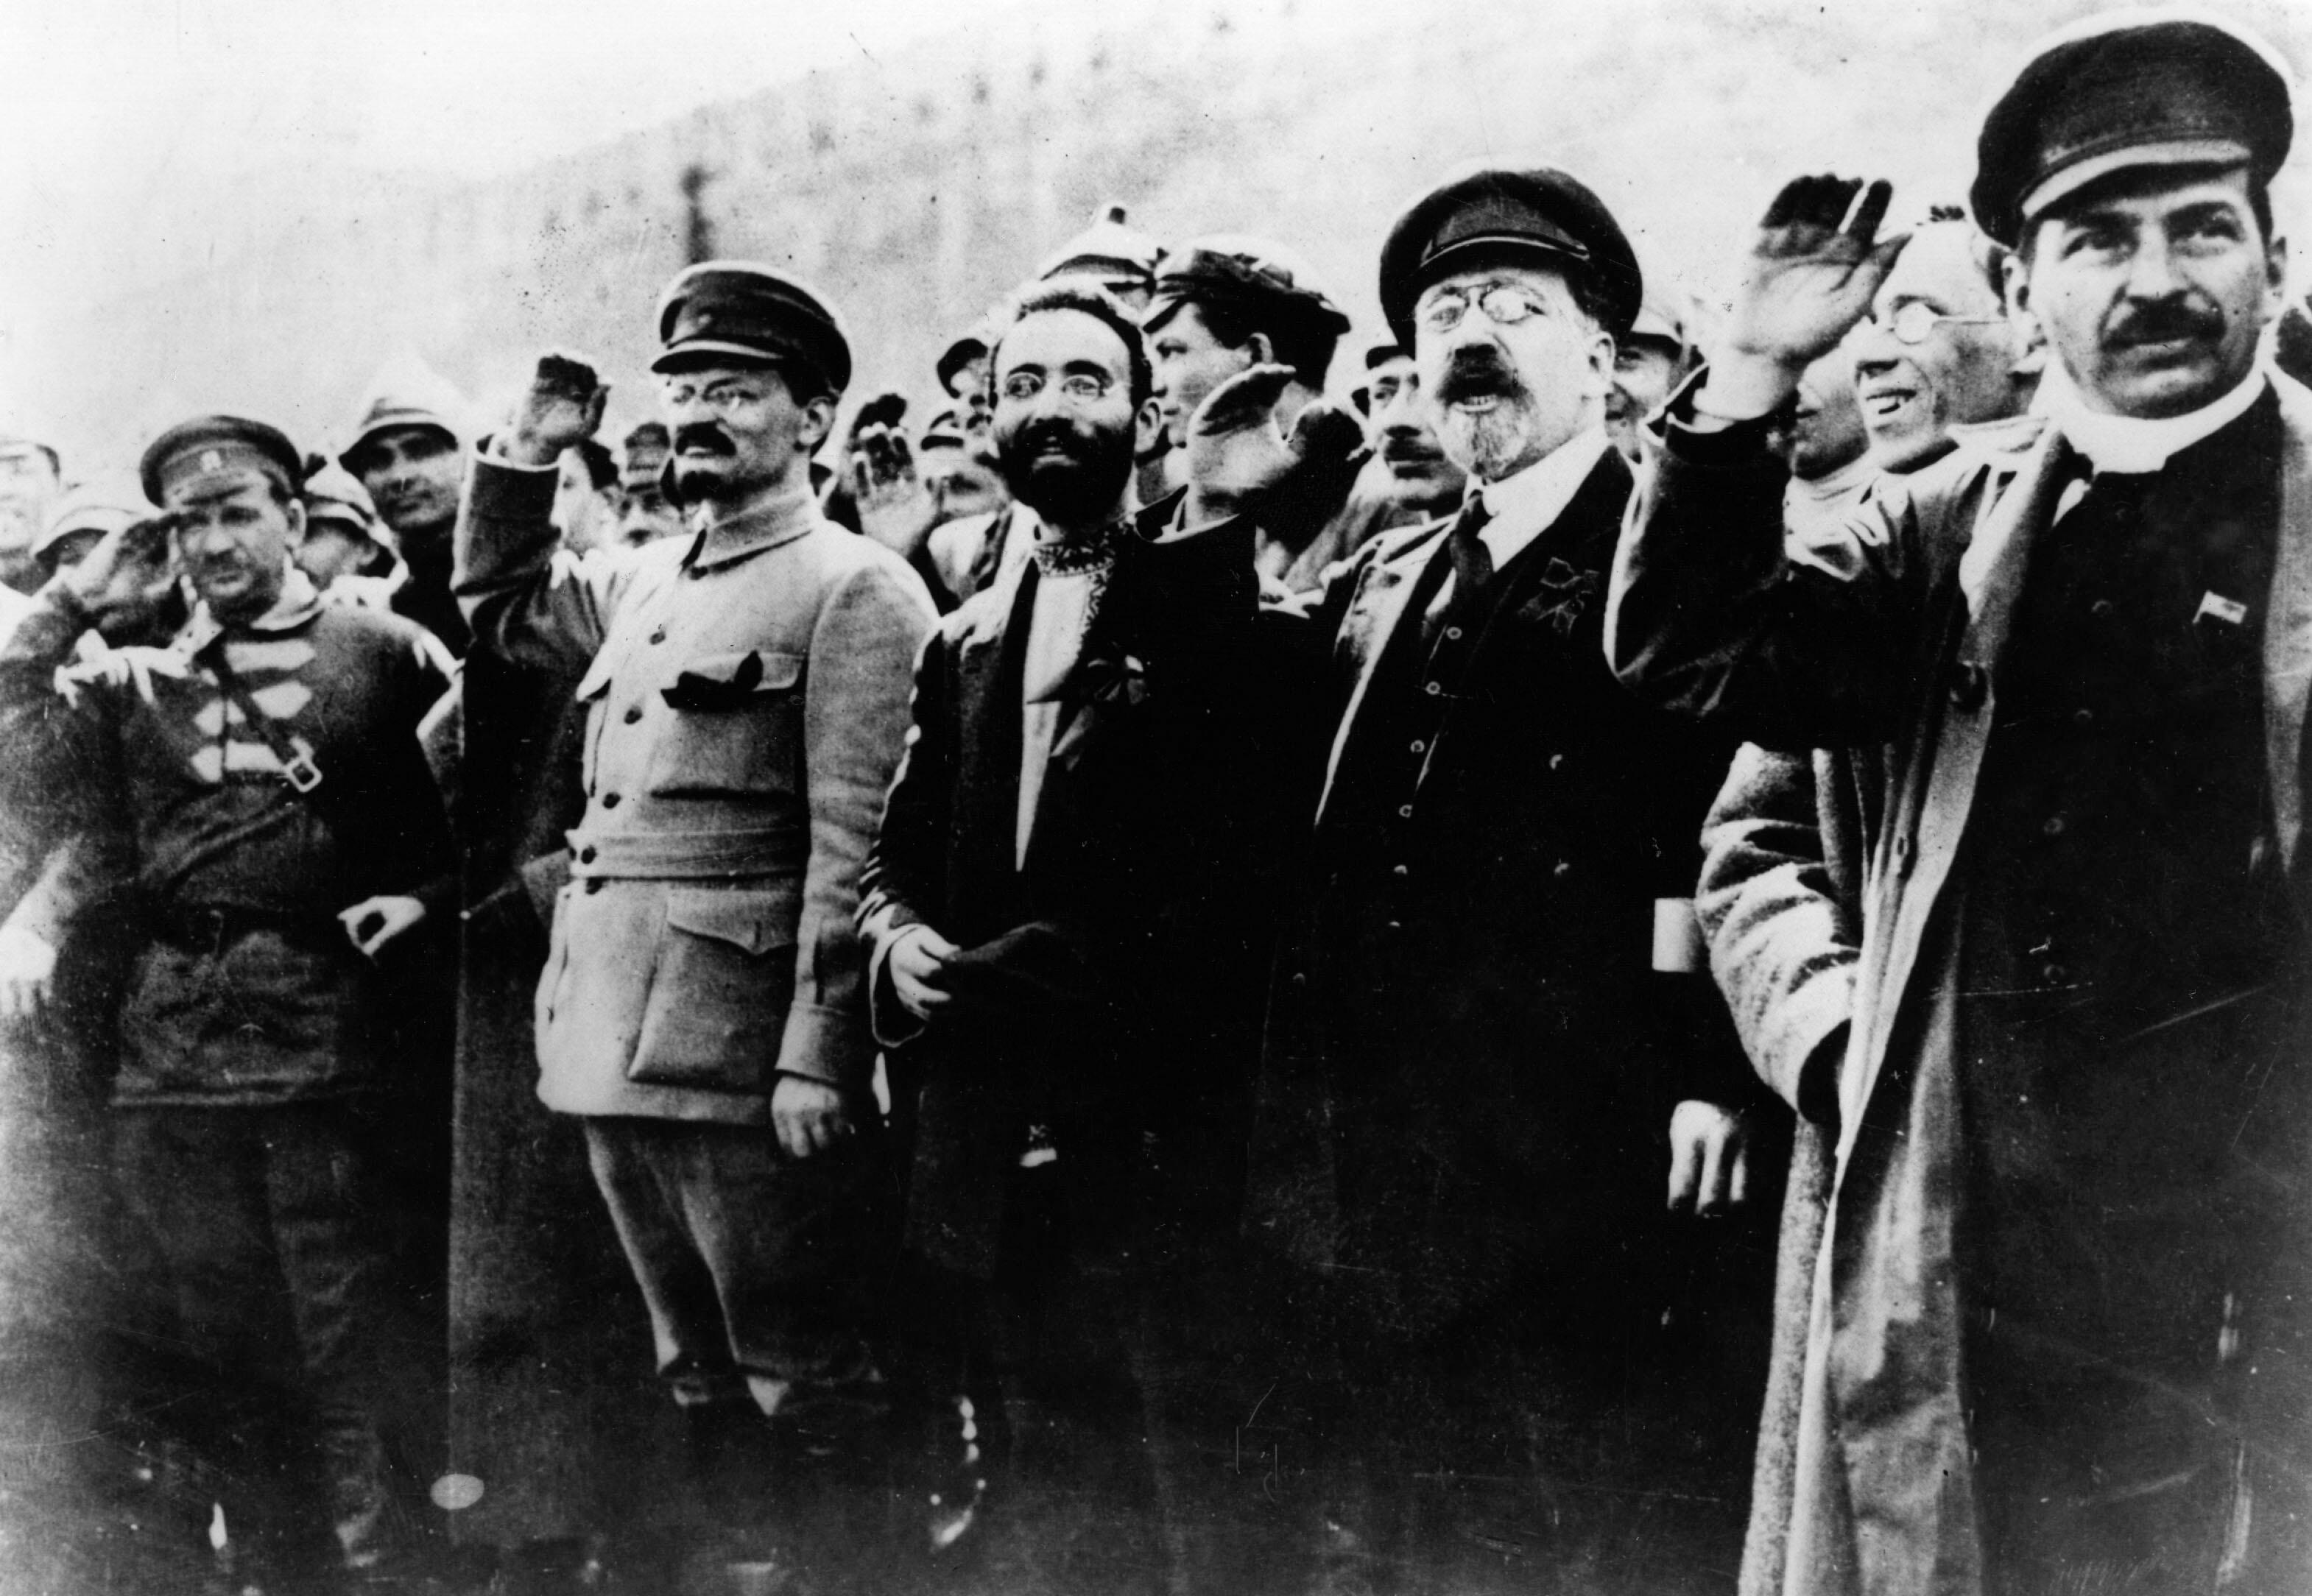 Communist leaders including Joseph Stalin (far right) and Leon Trotsky (second from left) salute supporters during the Russian Revolution. (Photo from Keystone/Getty Images.)